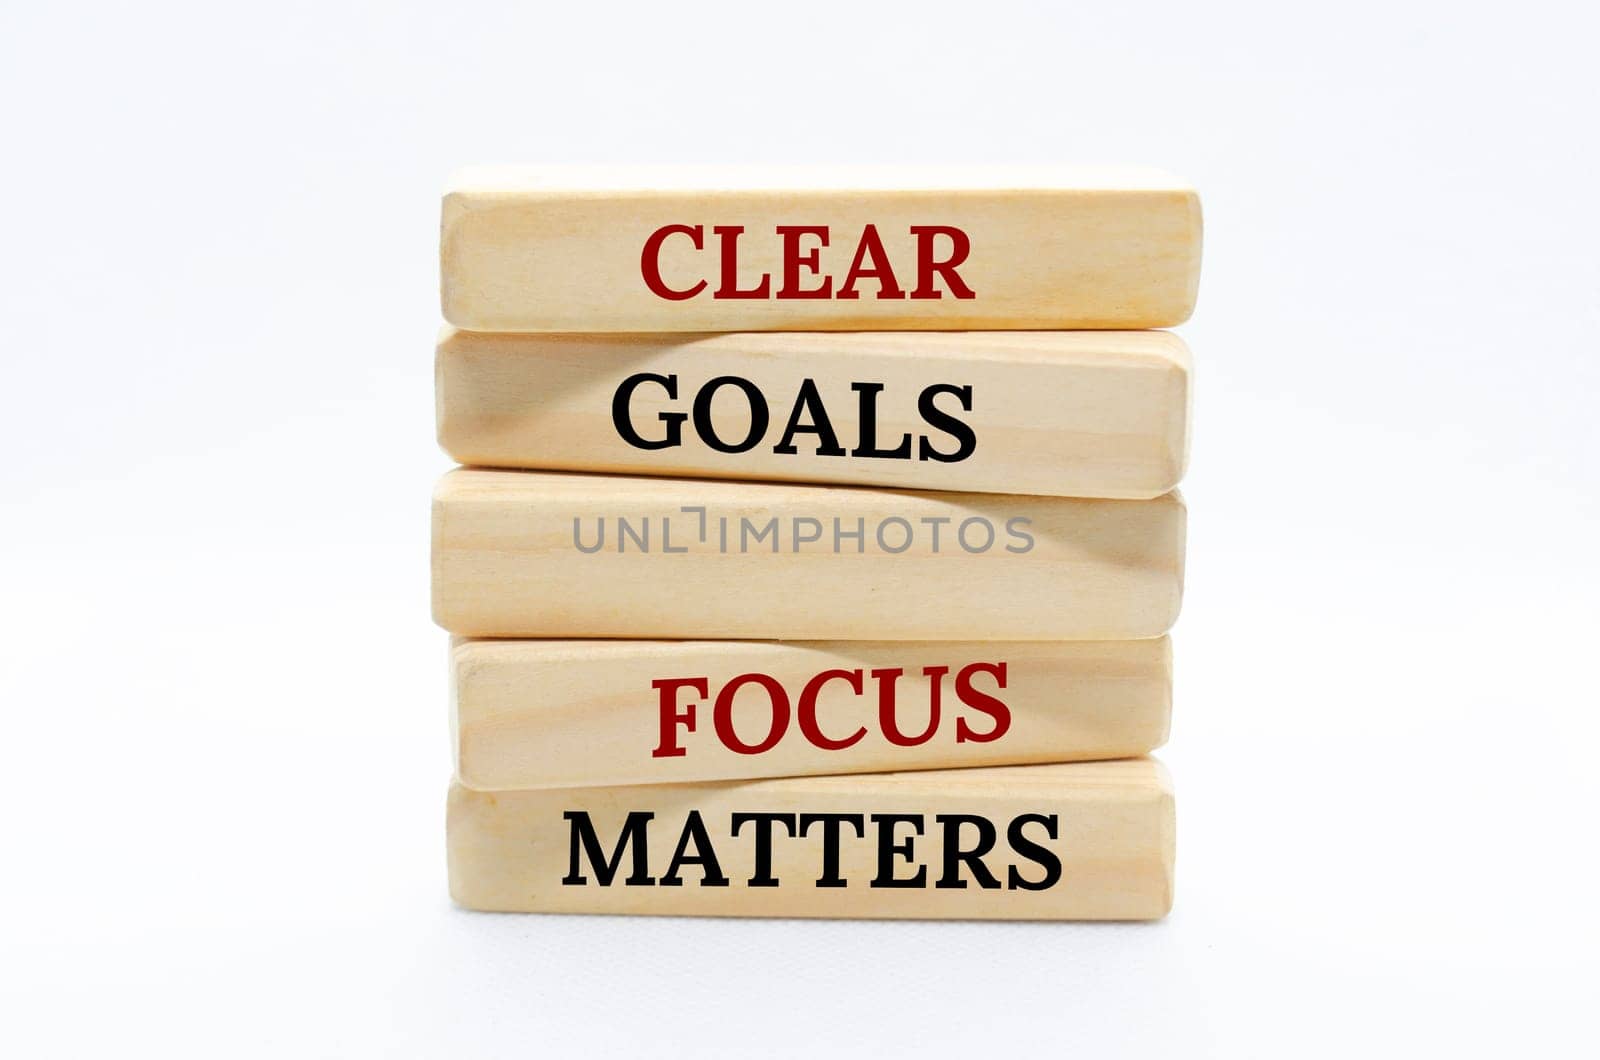 Clear goals and focus matters text on wooden blocks with white cover background.